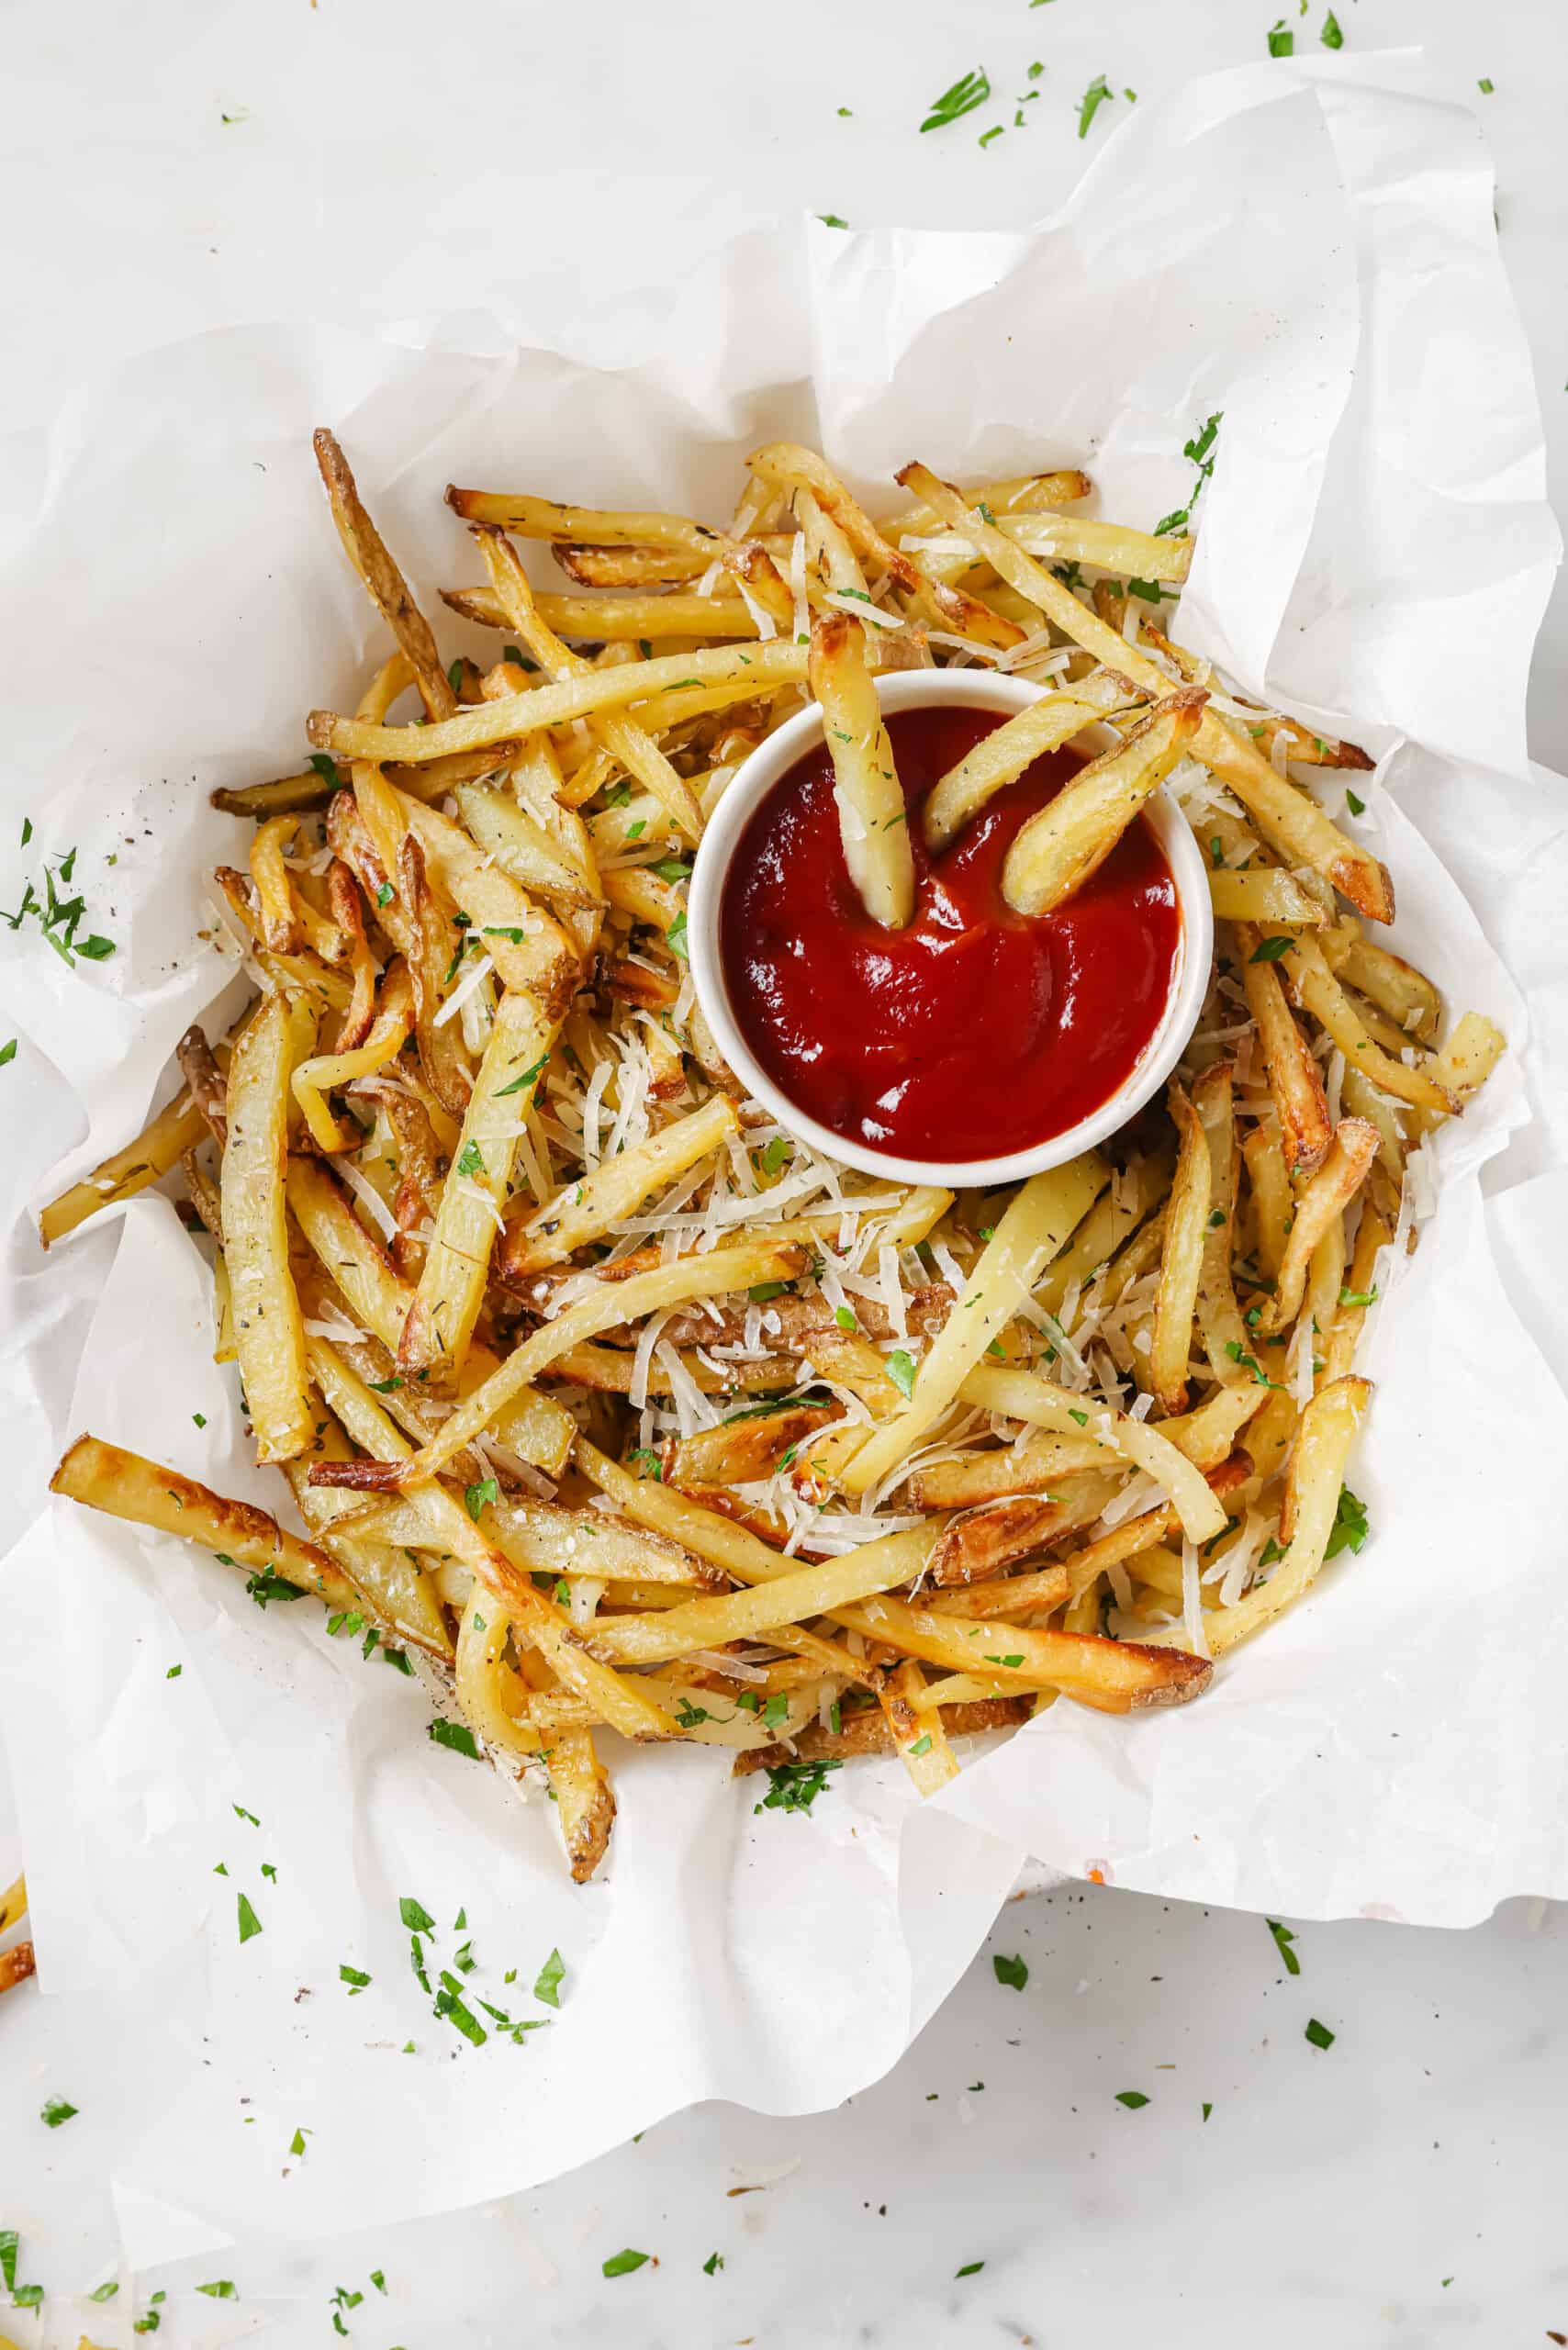 Garlic parmesan fries with a side of ketchup. 